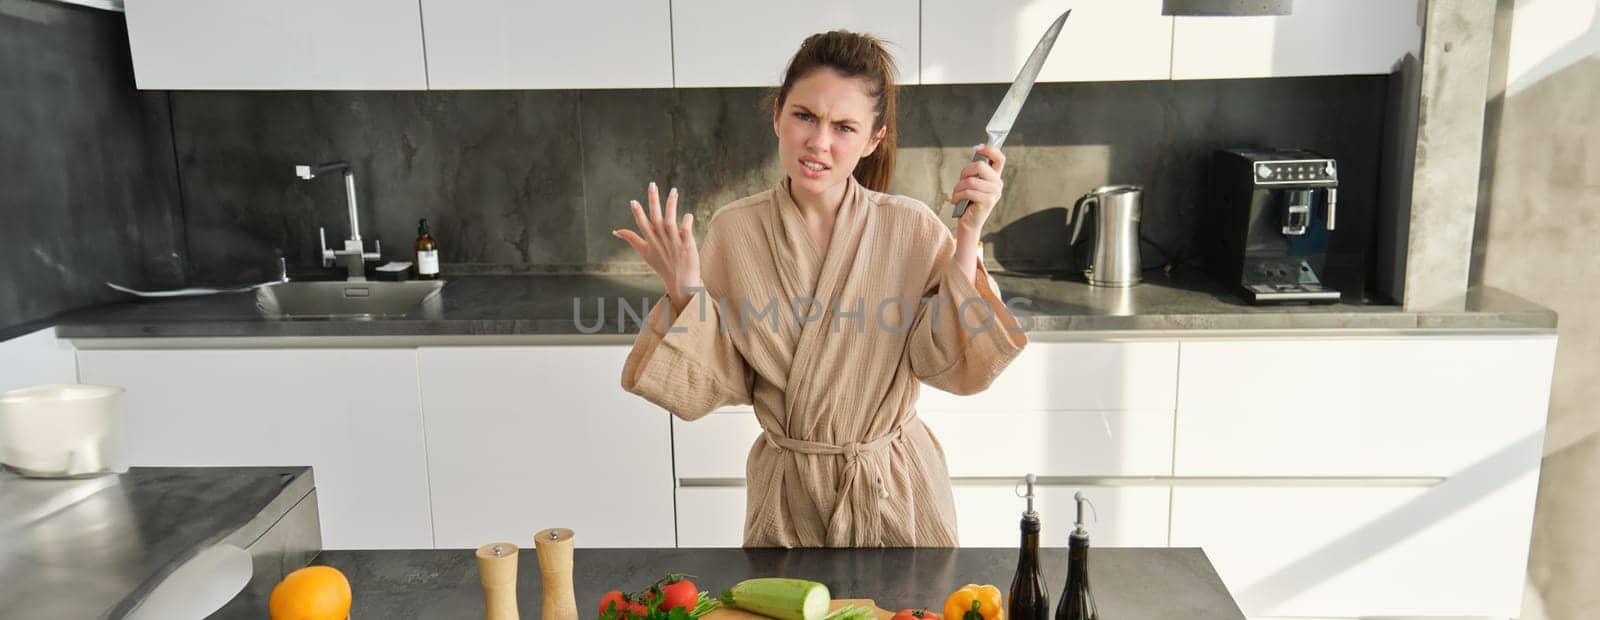 Angry brunette woman with knife, standing in the kitchen, annoyed and frustrated to cook, making upset grimace, standing in bathrobe.